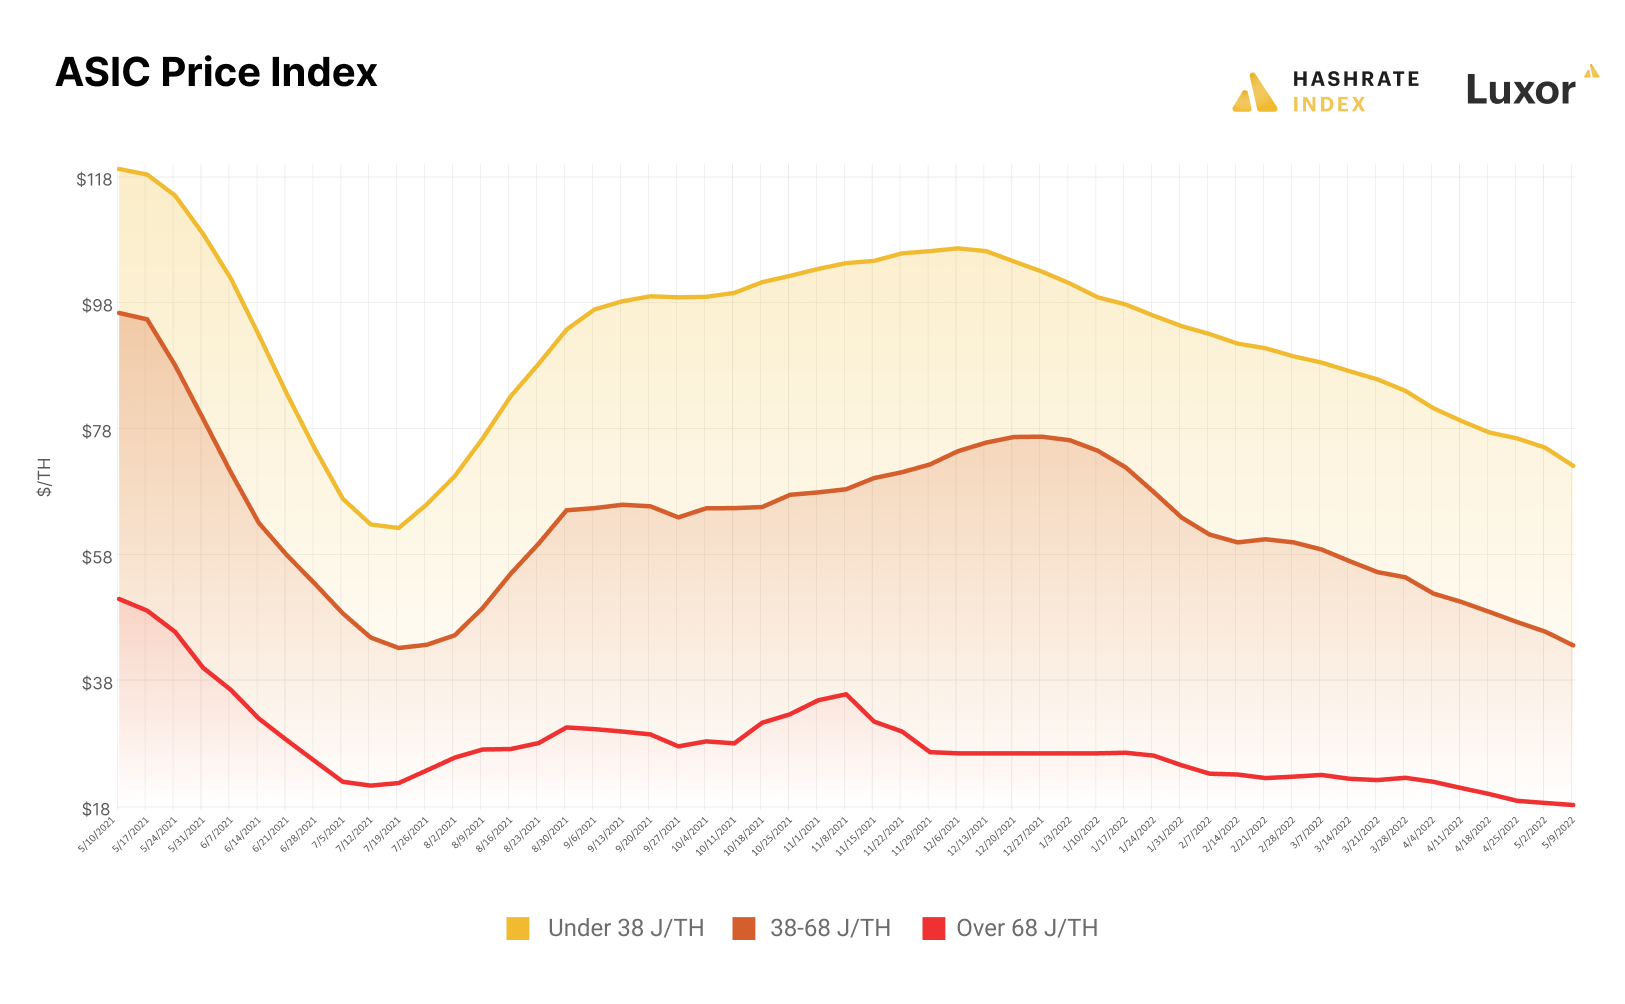 Bitcoin mining ASIC Price Index, weekly price $/TH by efficiency tier (2021-2022) | Source: Hashrate Index ASIC Price Index